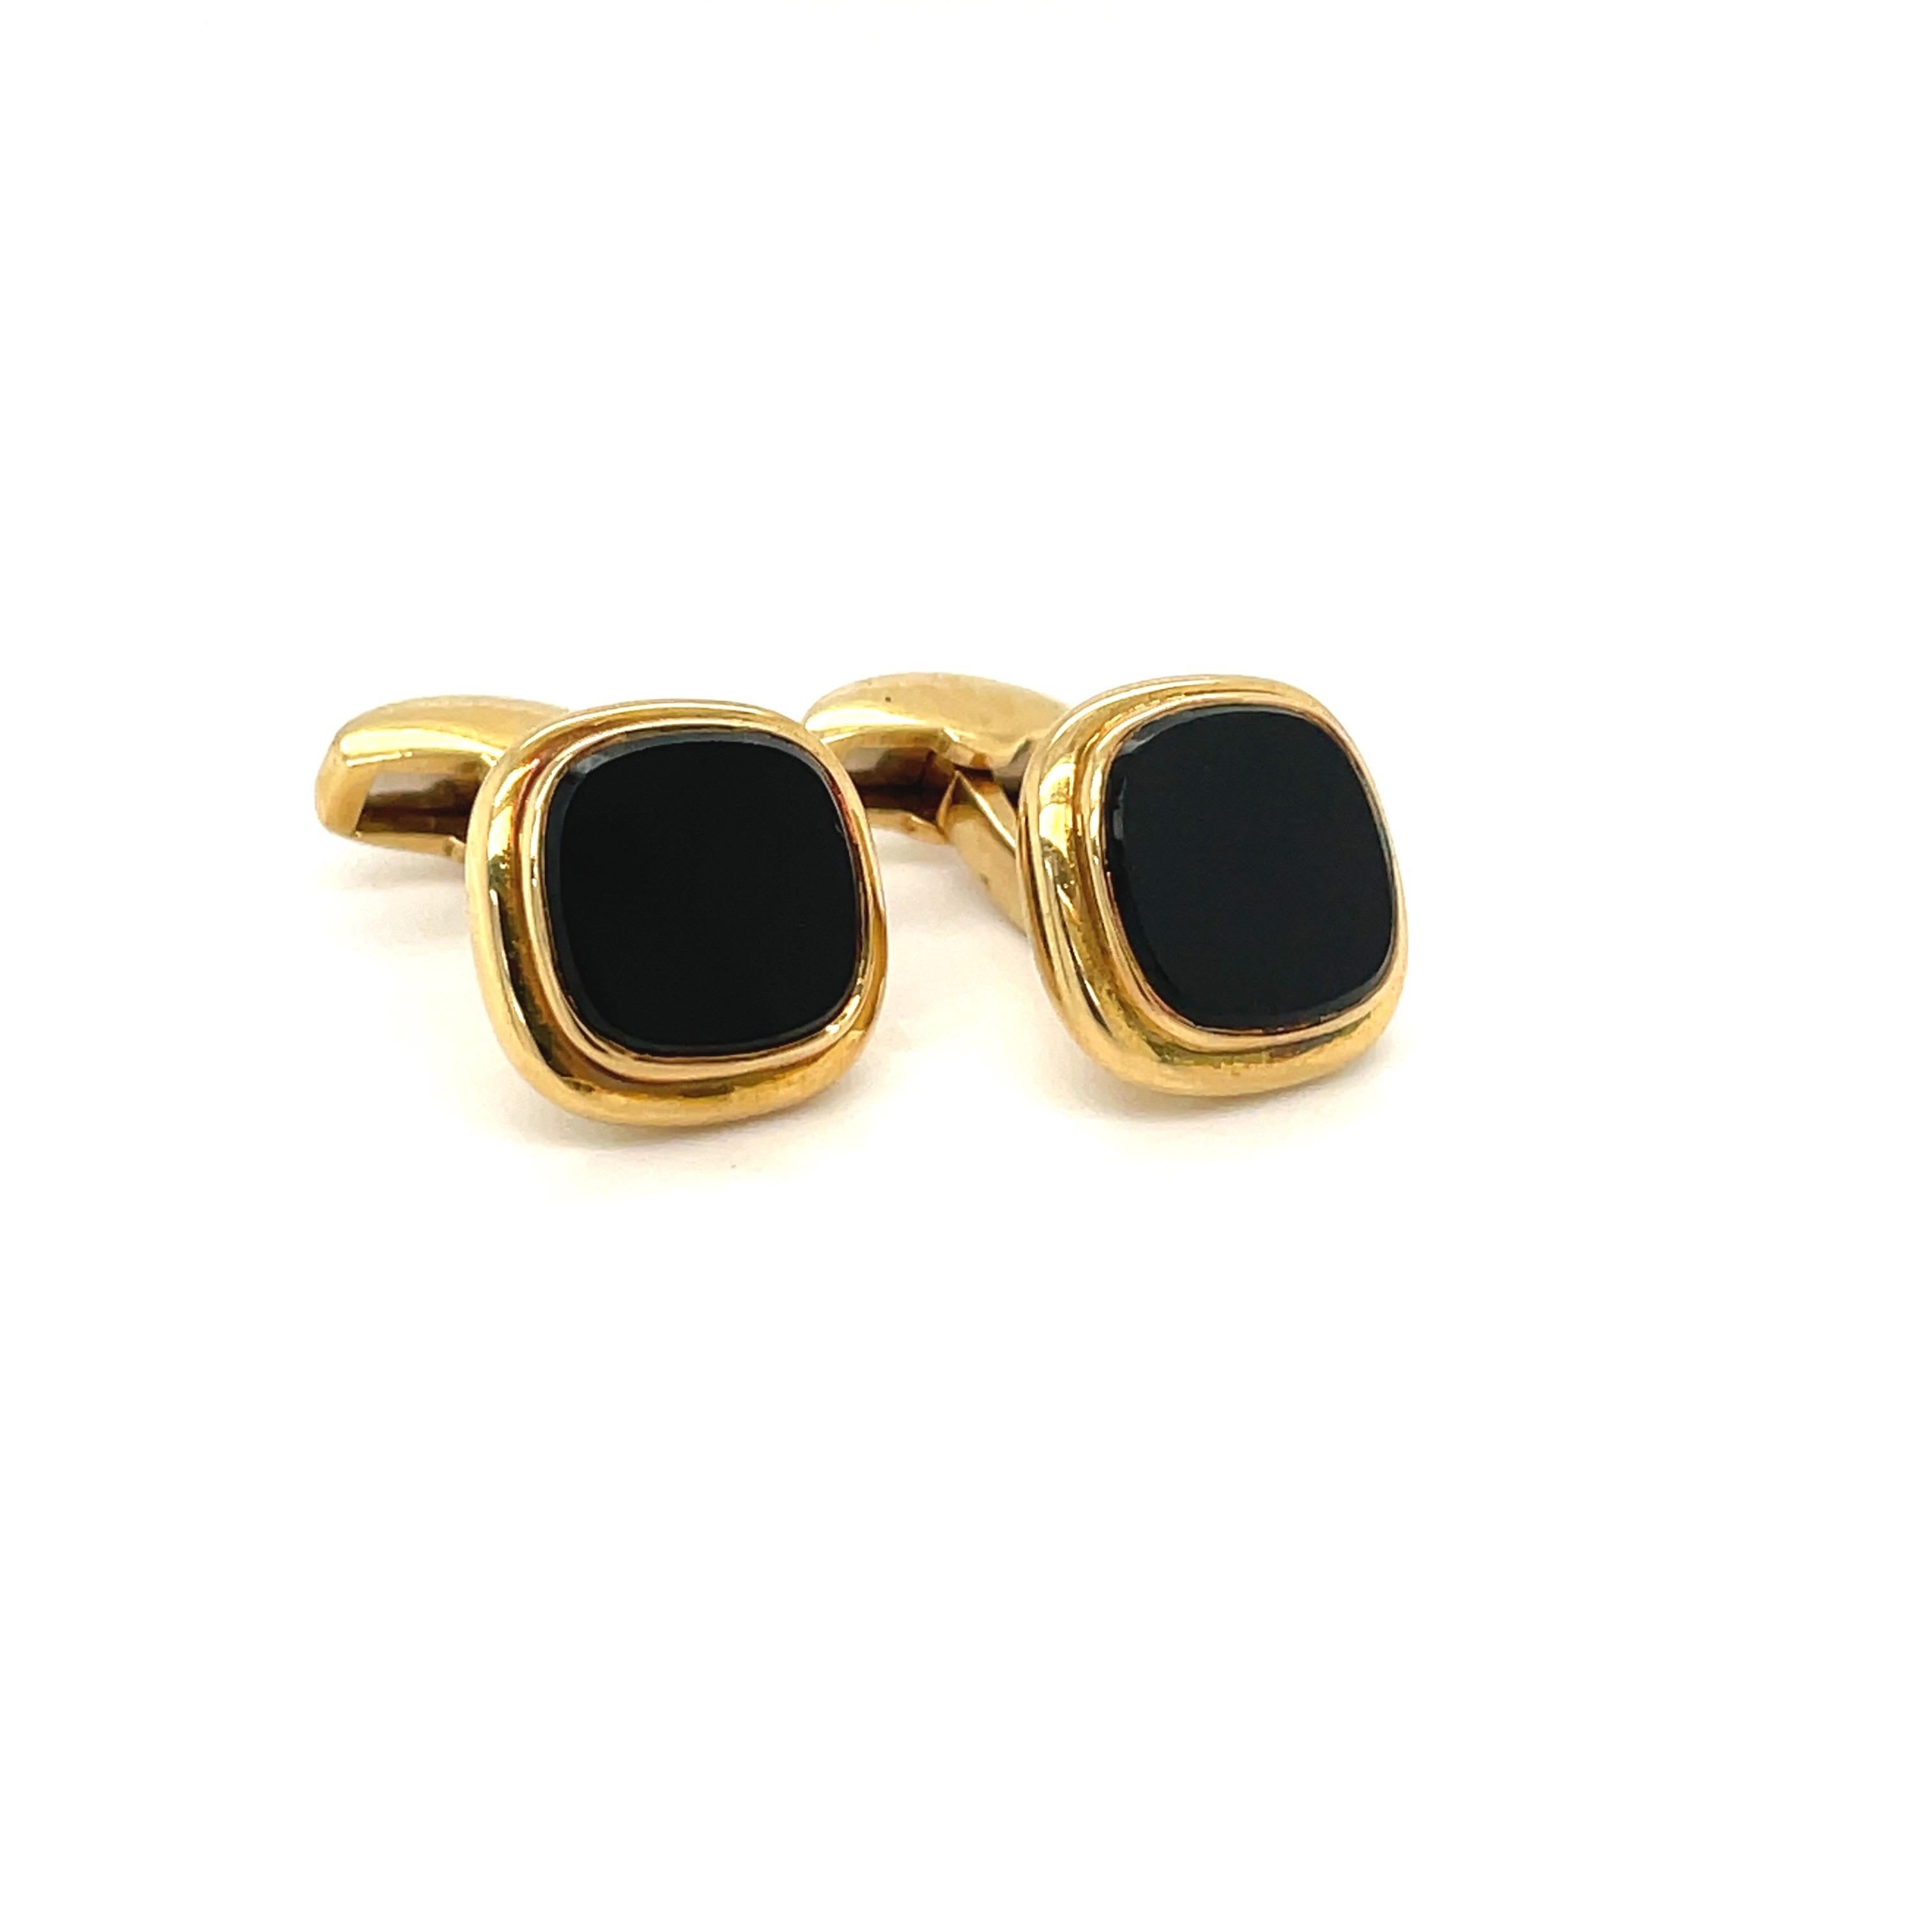 18 karat yellow gold cuff links by Deakin & Francis, England's oldest family jewelers since 1786.
The  cushion shaped cuff links center black onyx with a shiny gold bezel. The bar back style cuff links are 14 mm.
Stamped  D&F  750 along with the